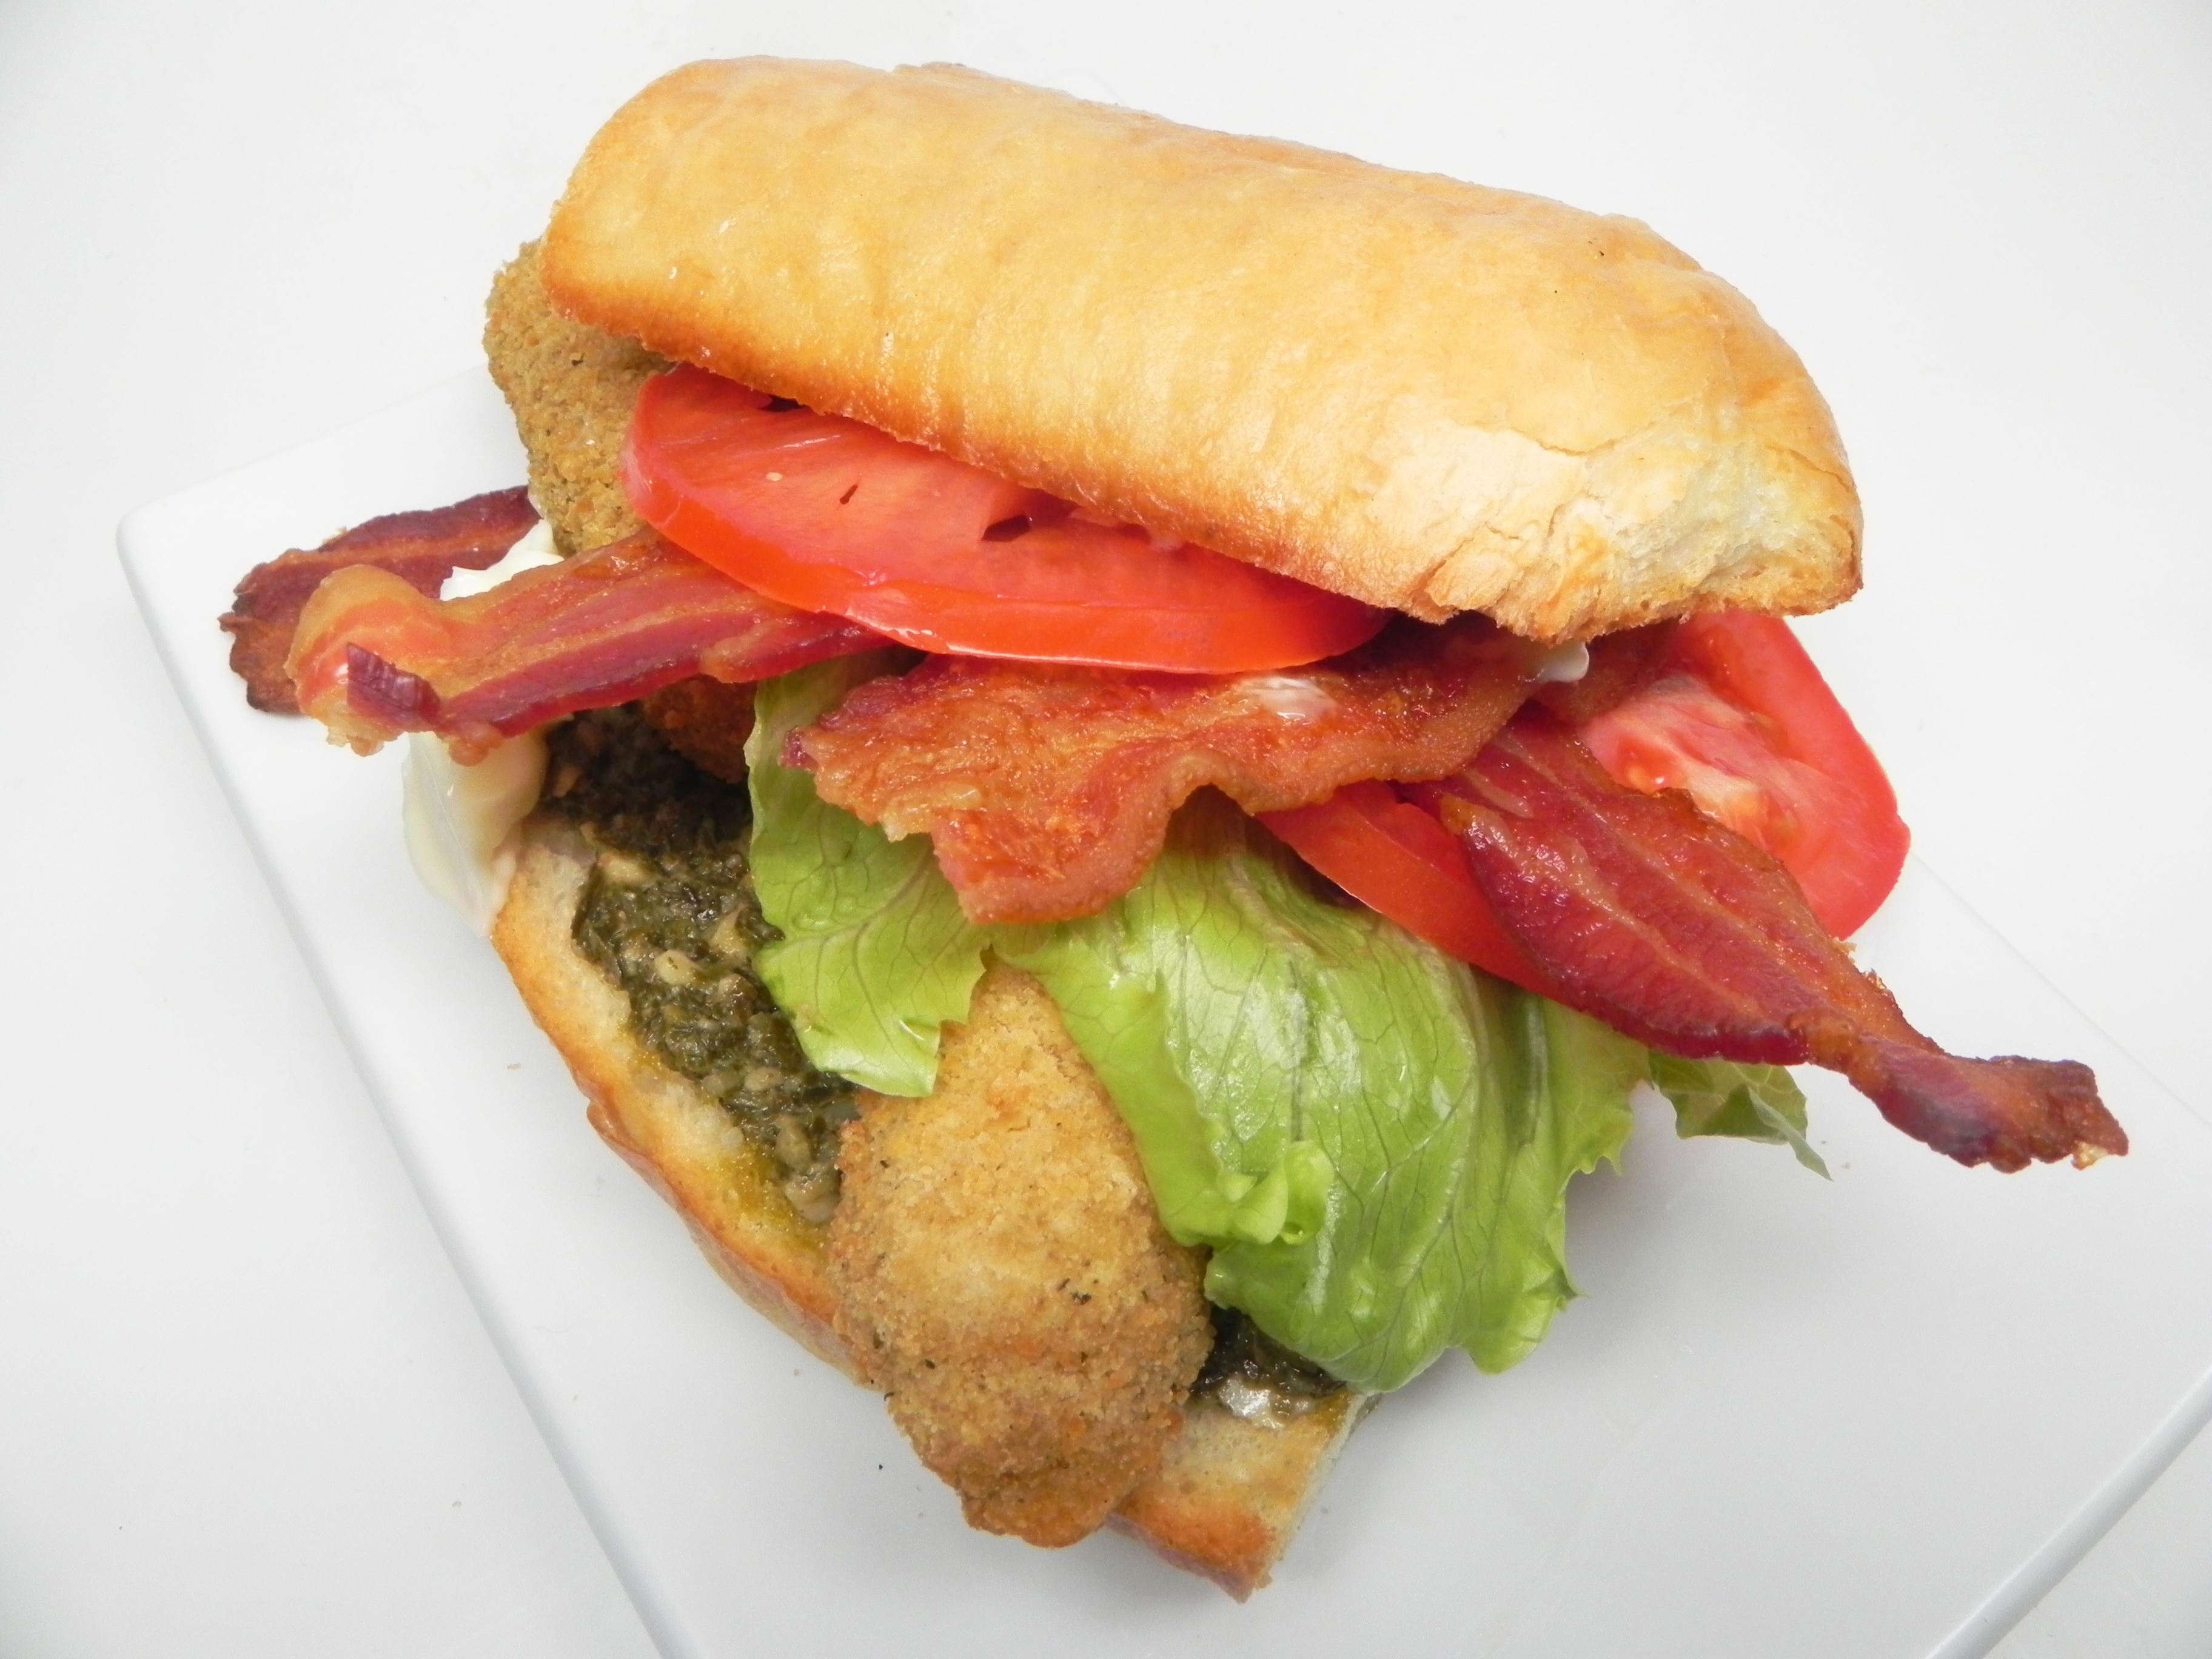 <p>Turns out, you can make a BLT better! Adding crispy baked mozzarella sticks to the classic bacon, lettuce, and tomato combo takes the BLT to dazzling, delicious new heights. "I had a ton of mozzarella sticks and needed to find a use for them. A BLT panini seemed a good place to insert them," says Lisa Mayer Kaelblein.</p>
                          